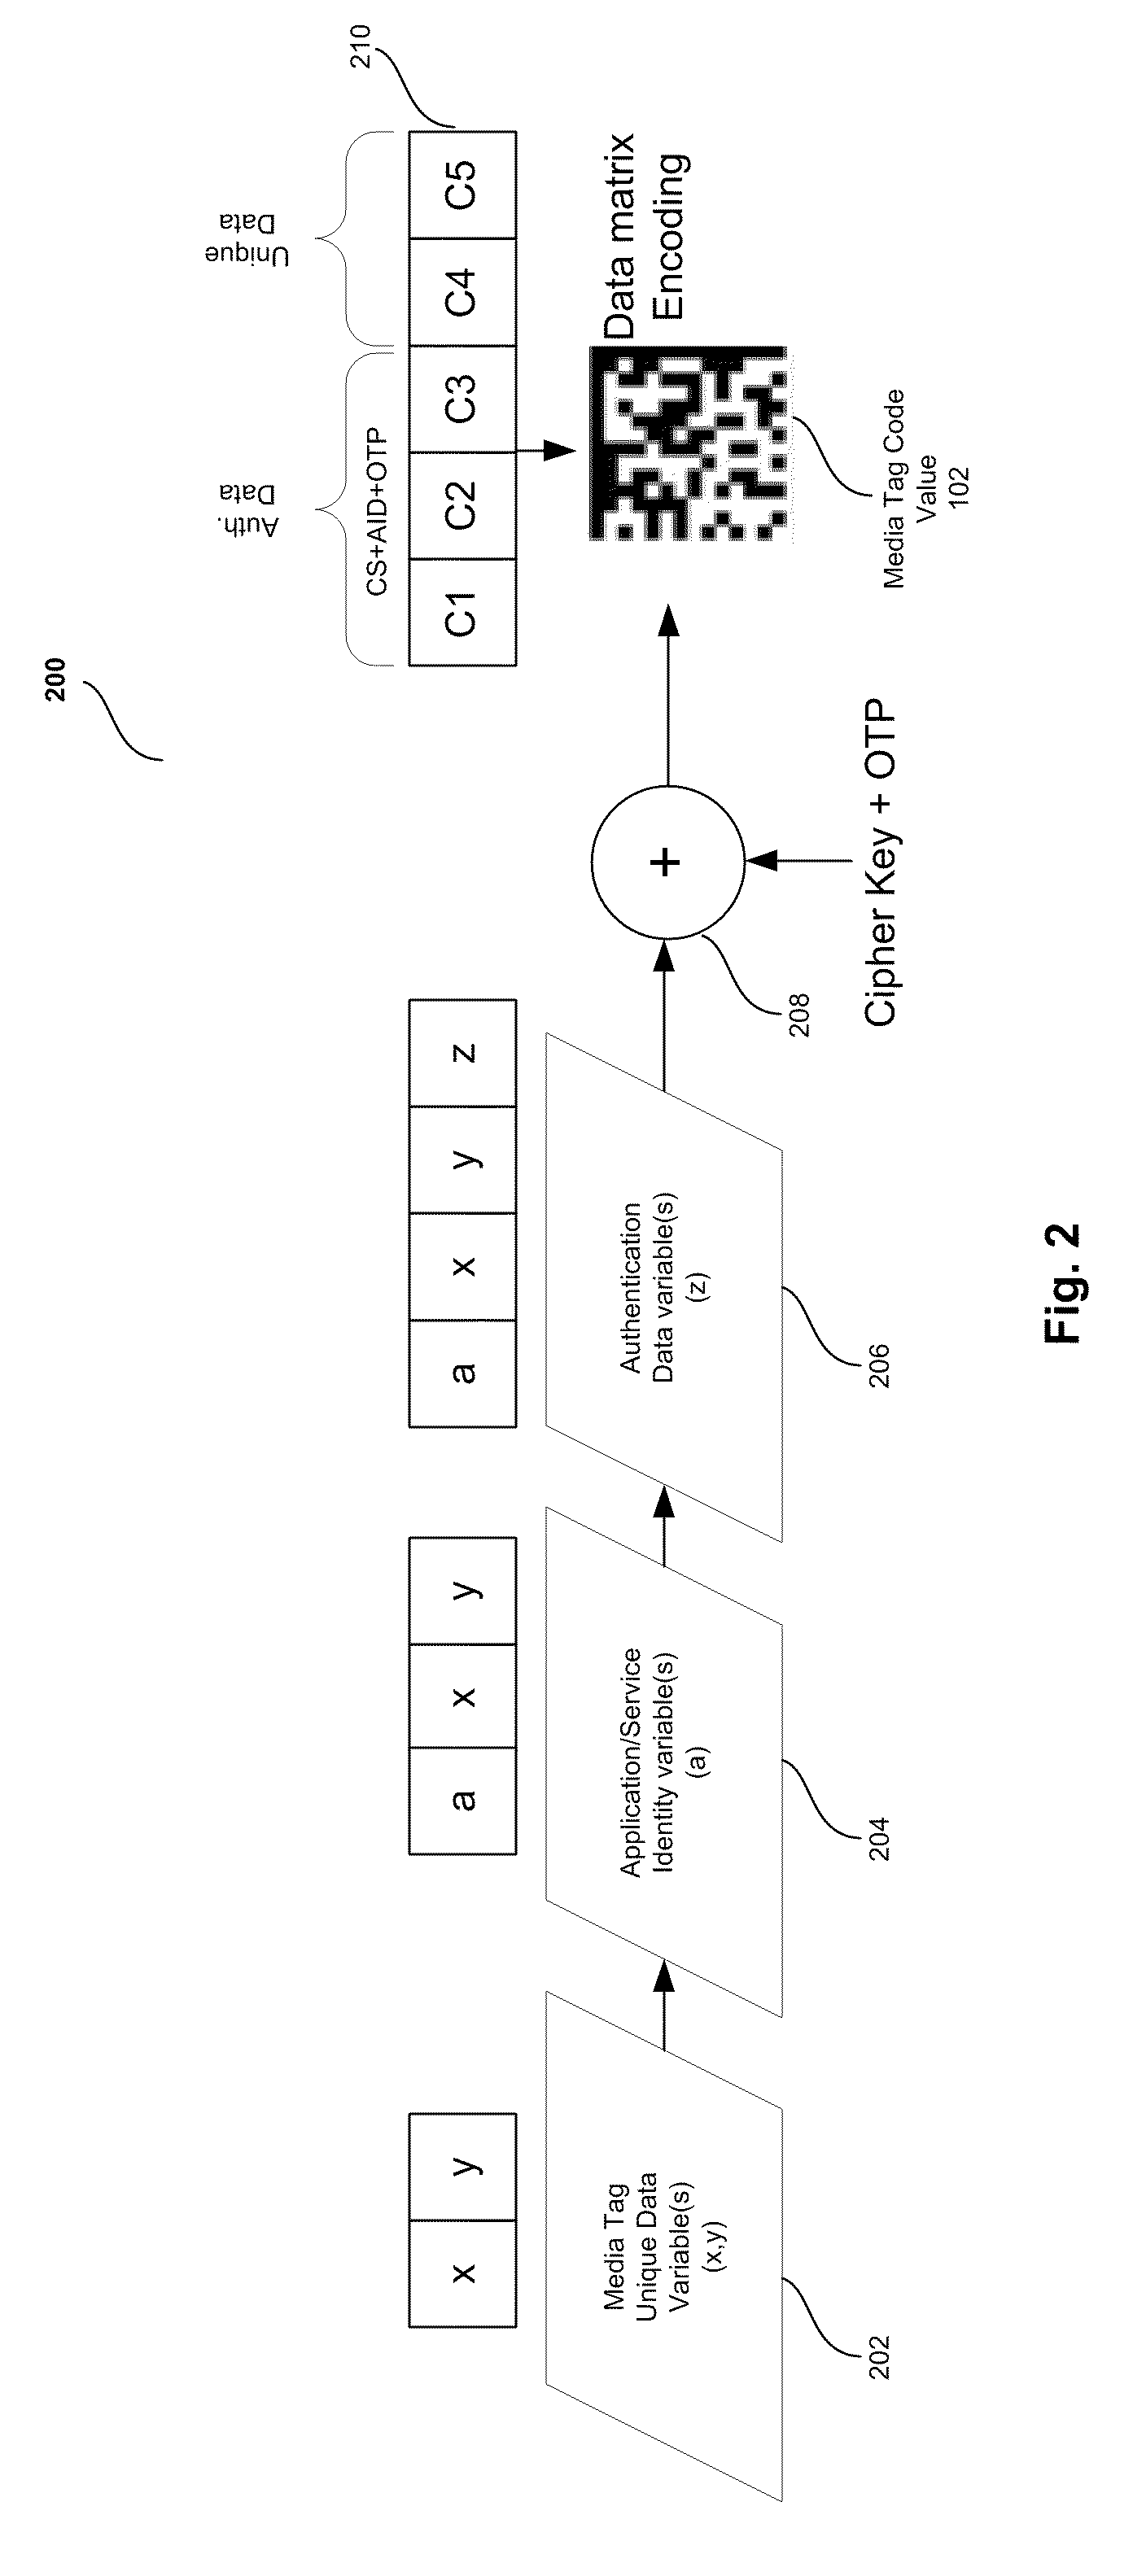 System and Method for Multimedia Storing and Retrieval Using Low-Cost Tags as Virtual Storage Mediums